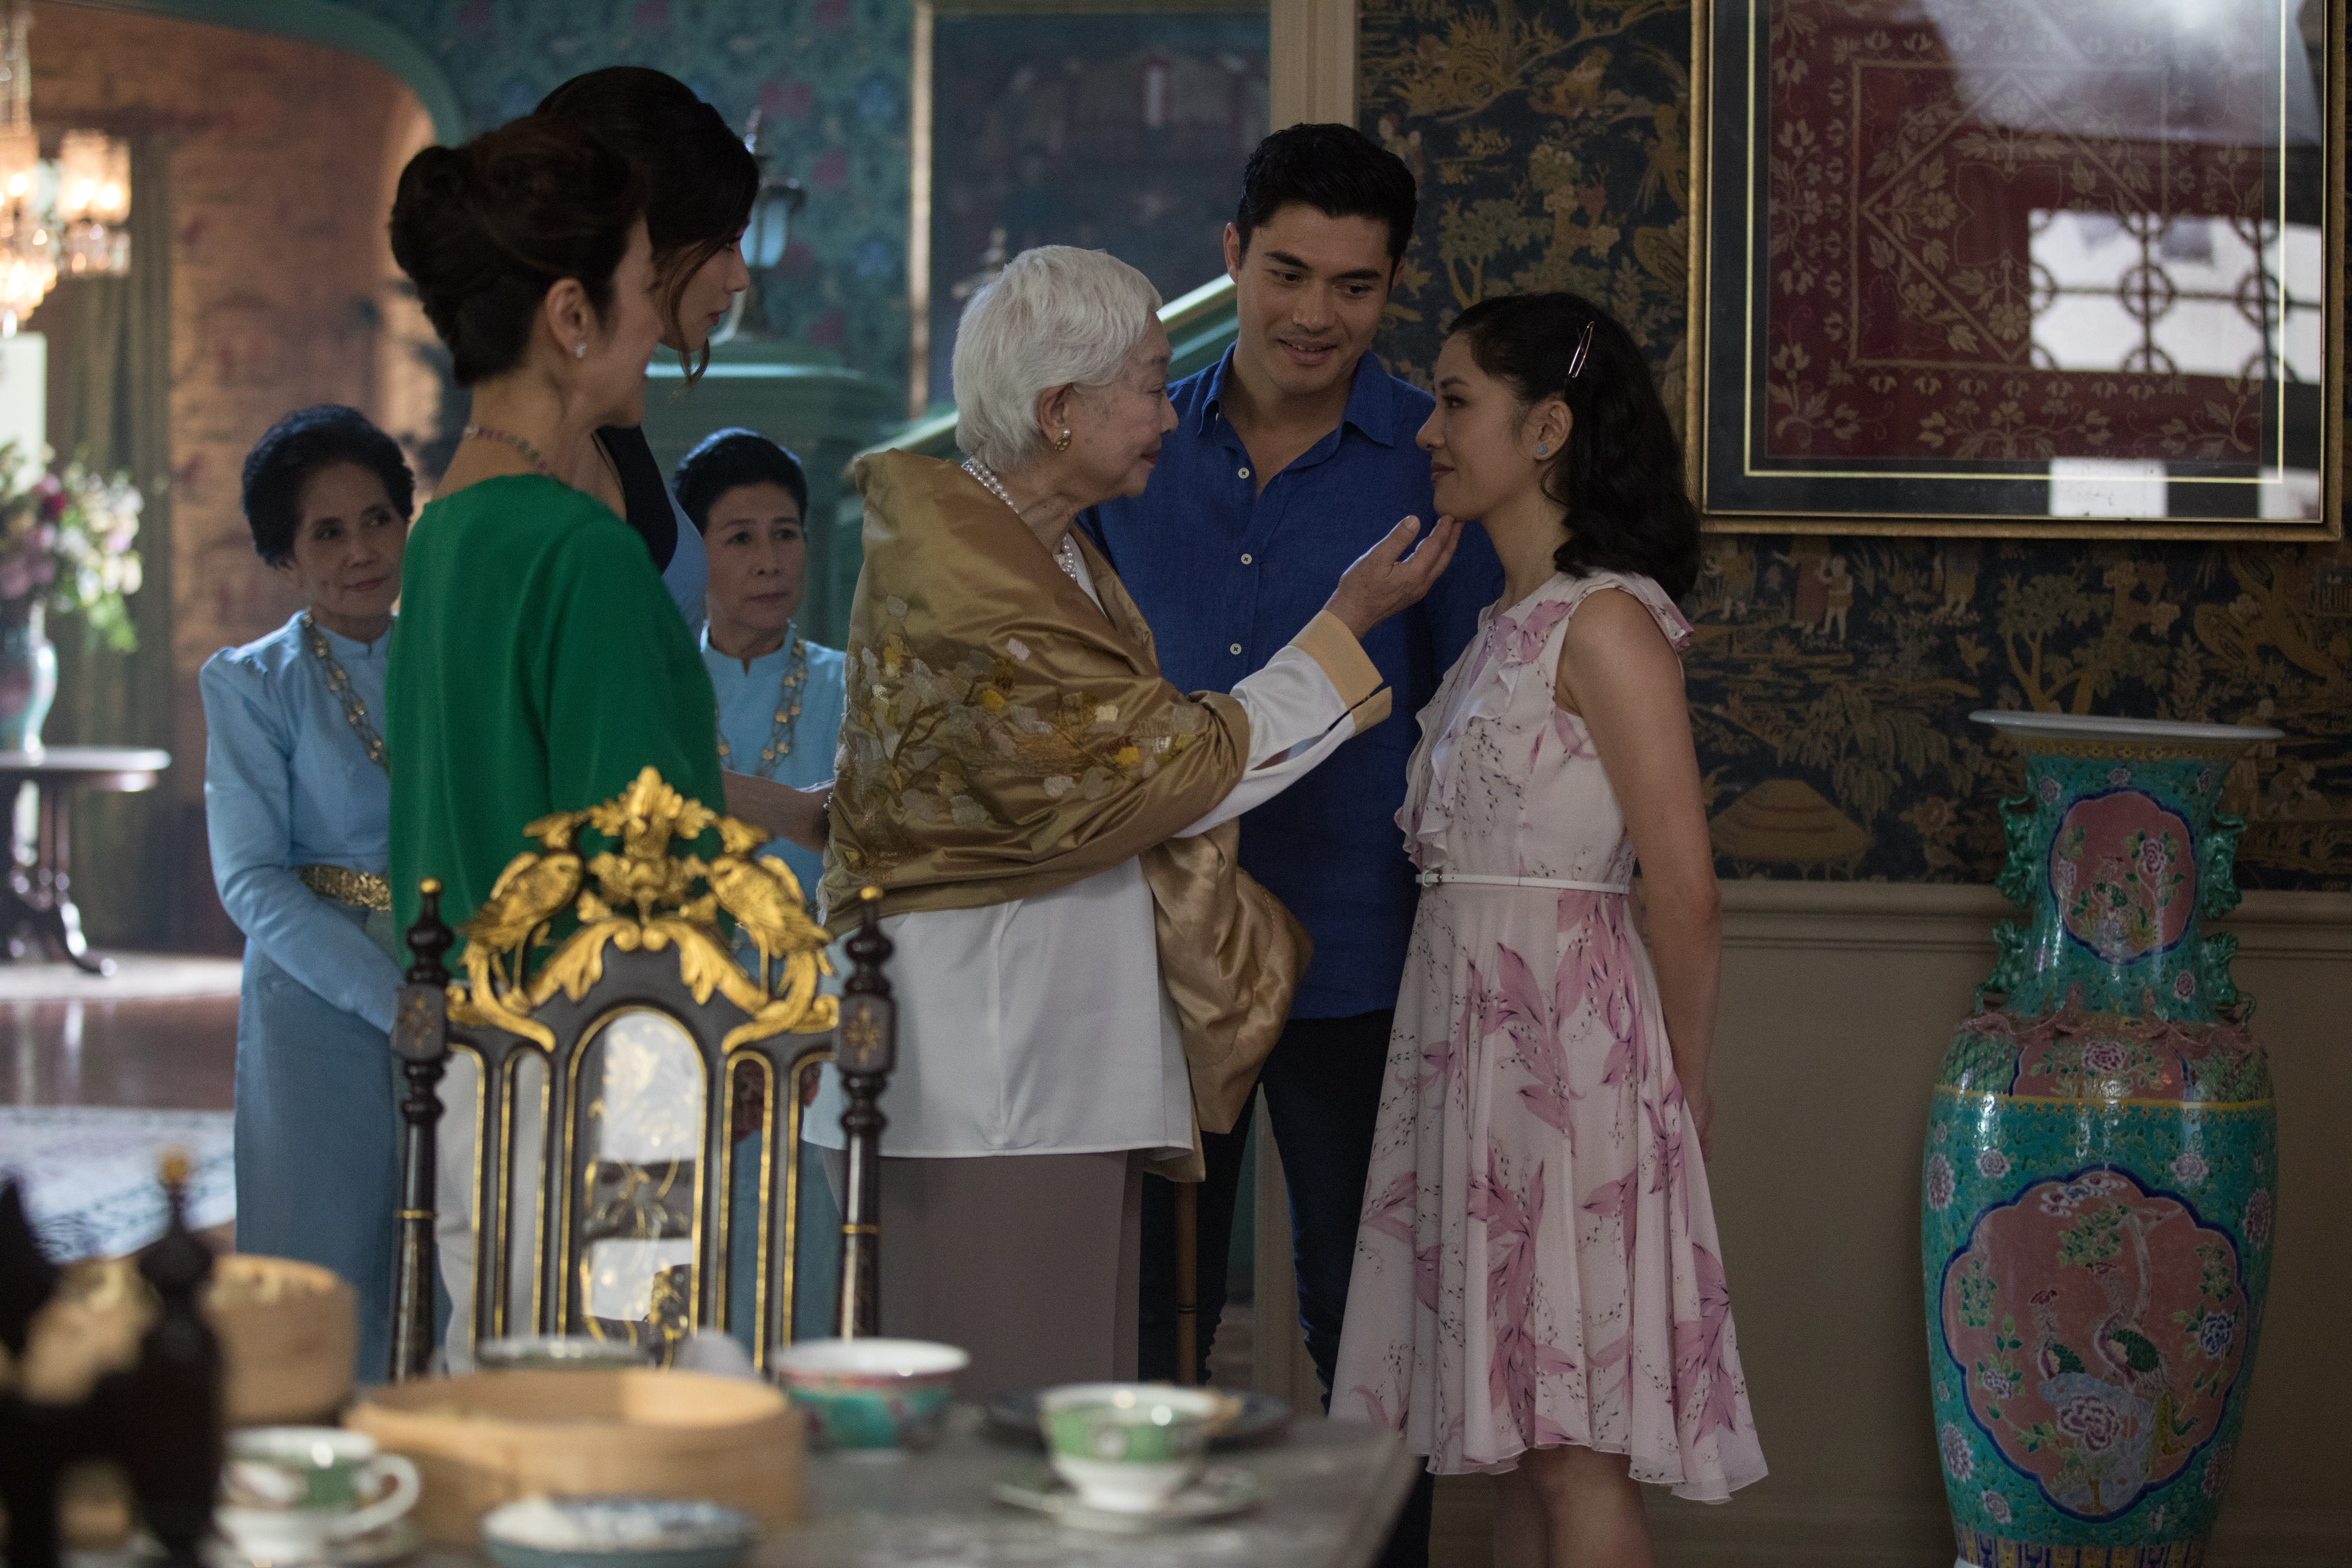 (L-R) MICHELLE YEOH as Eleanor, GEMMA CHAN as Astrid, LISA LU as Ah Ma, HENRY GOLDING as Nick and CONSTANCE WU as Rachel in Warner Bros. Pictures' and SK Global Entertainment's contemporary romantic comedy "CRAZY RICH ASIANS," a Warner Bros. Pictures release. Photo Credit: Courtesy of Warner Bros. Pictures